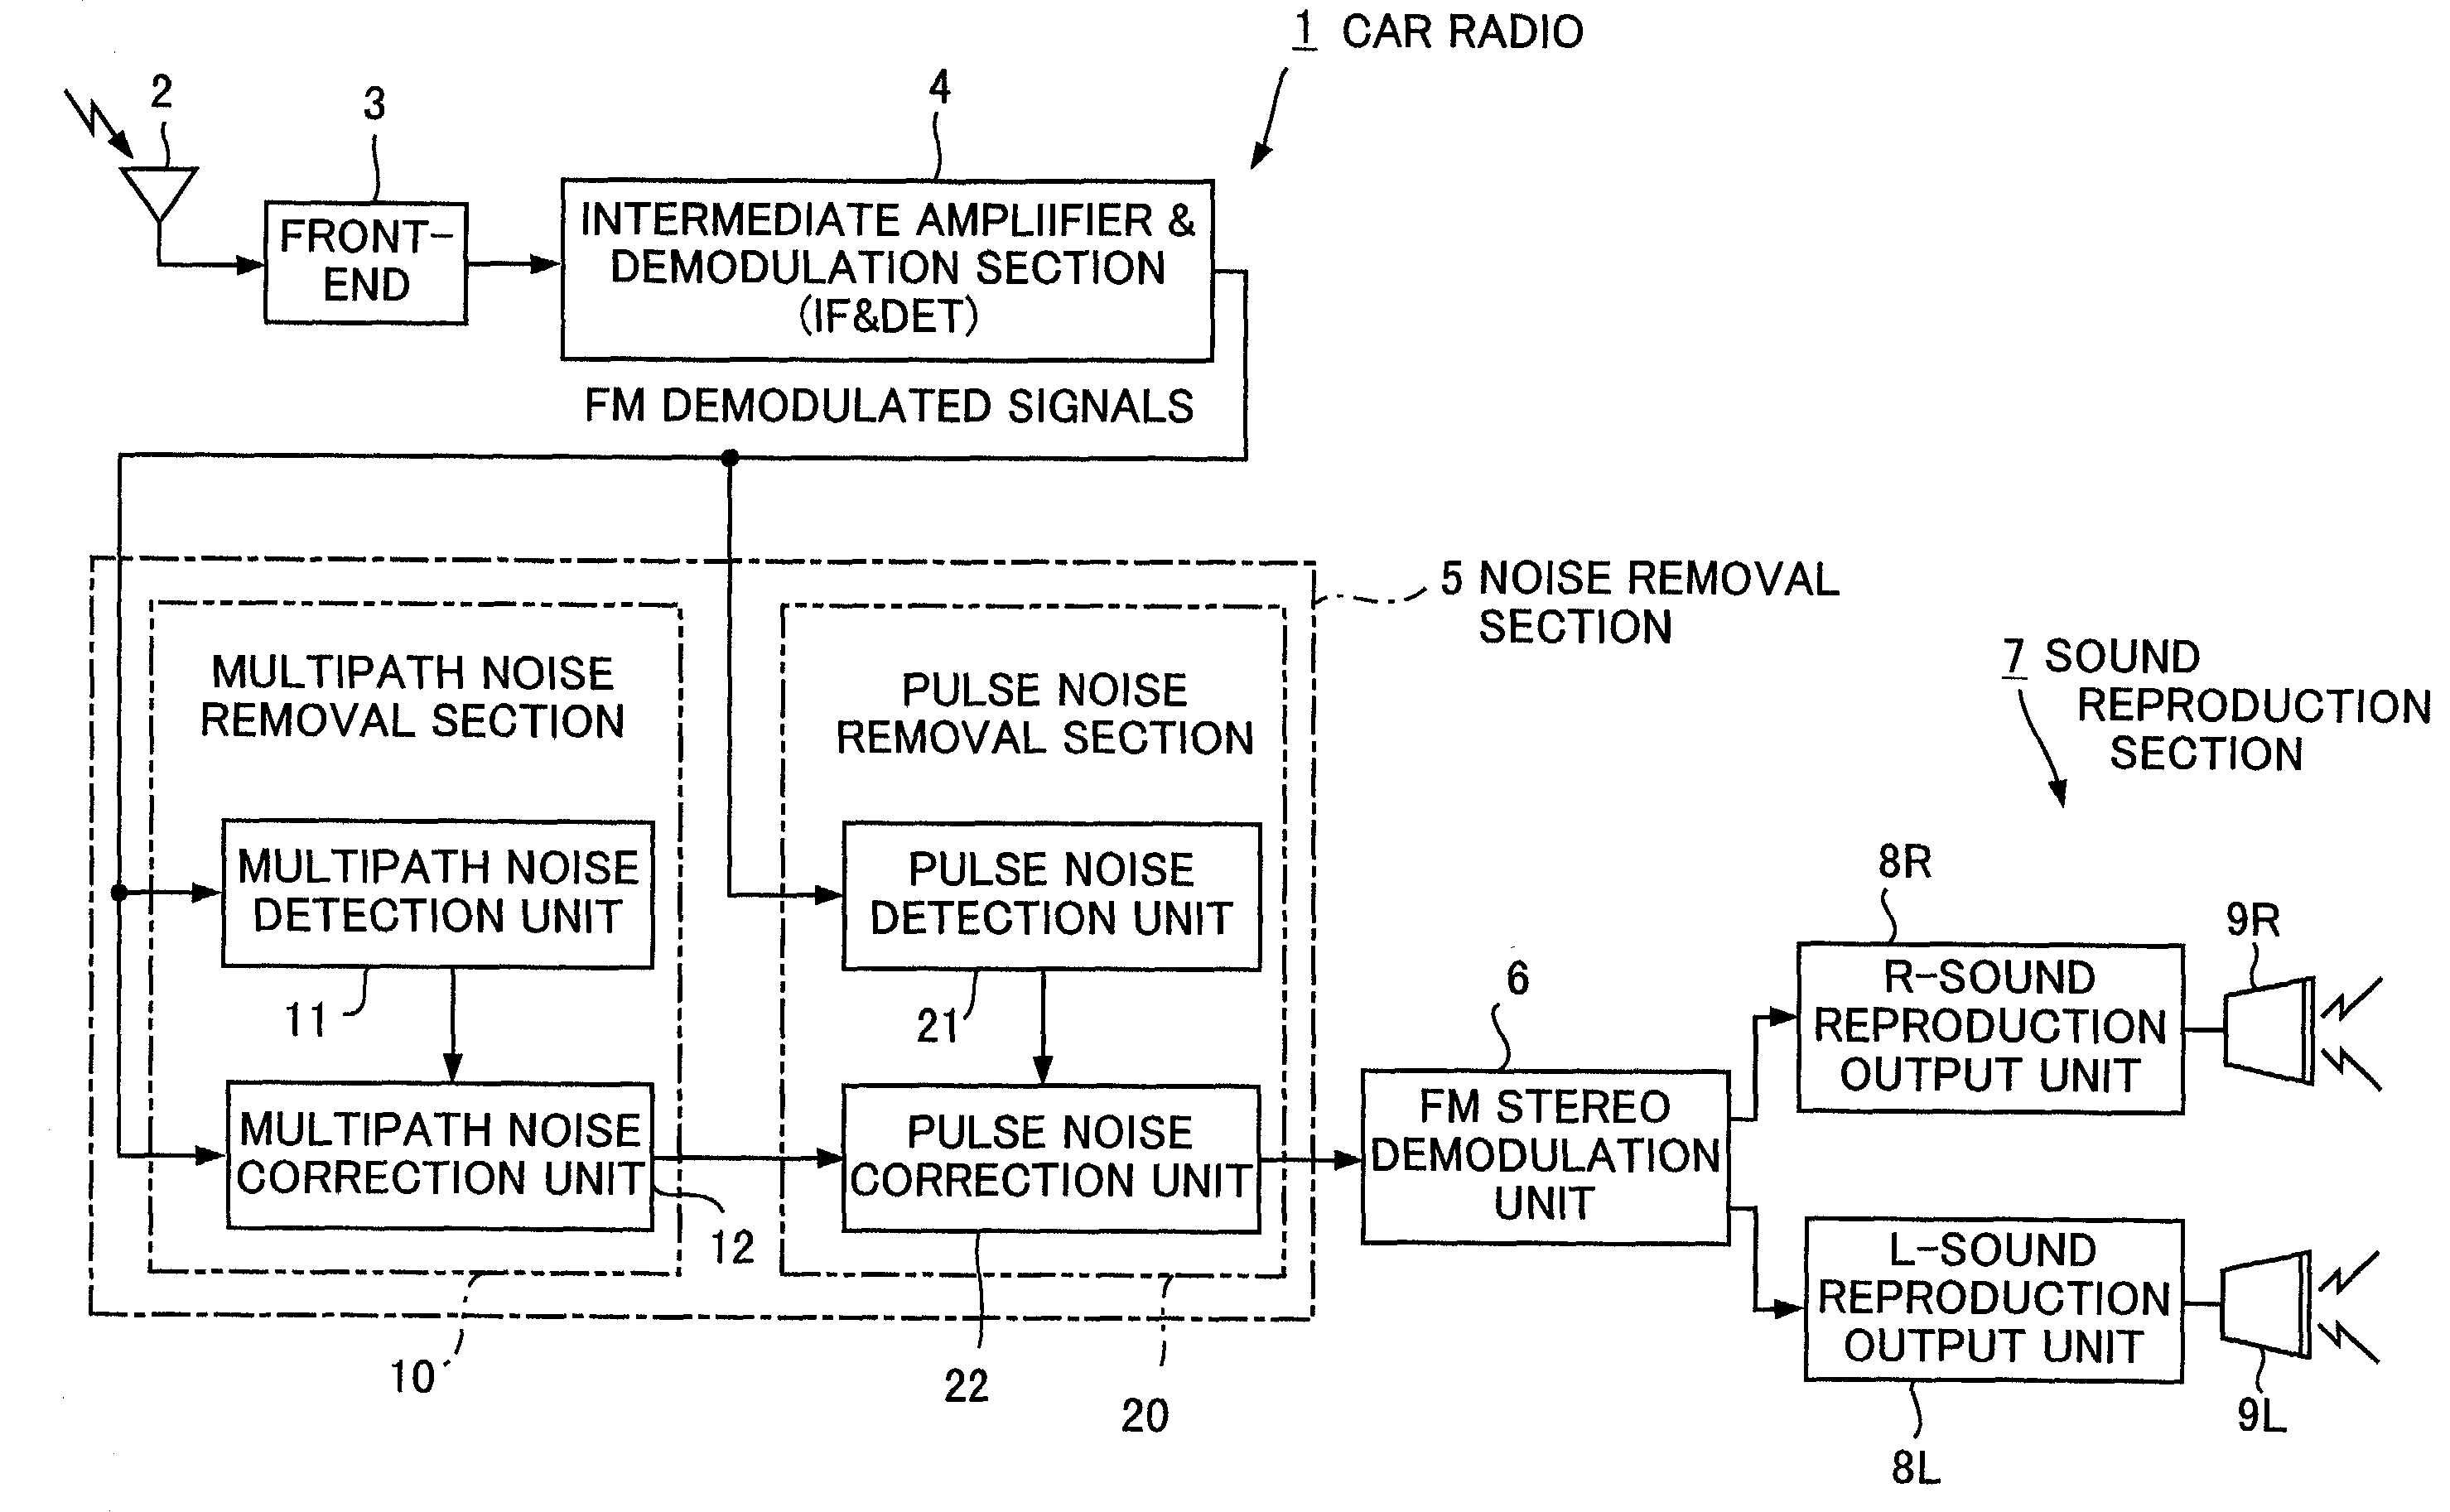 Noise removal apparatus and an FM receiver